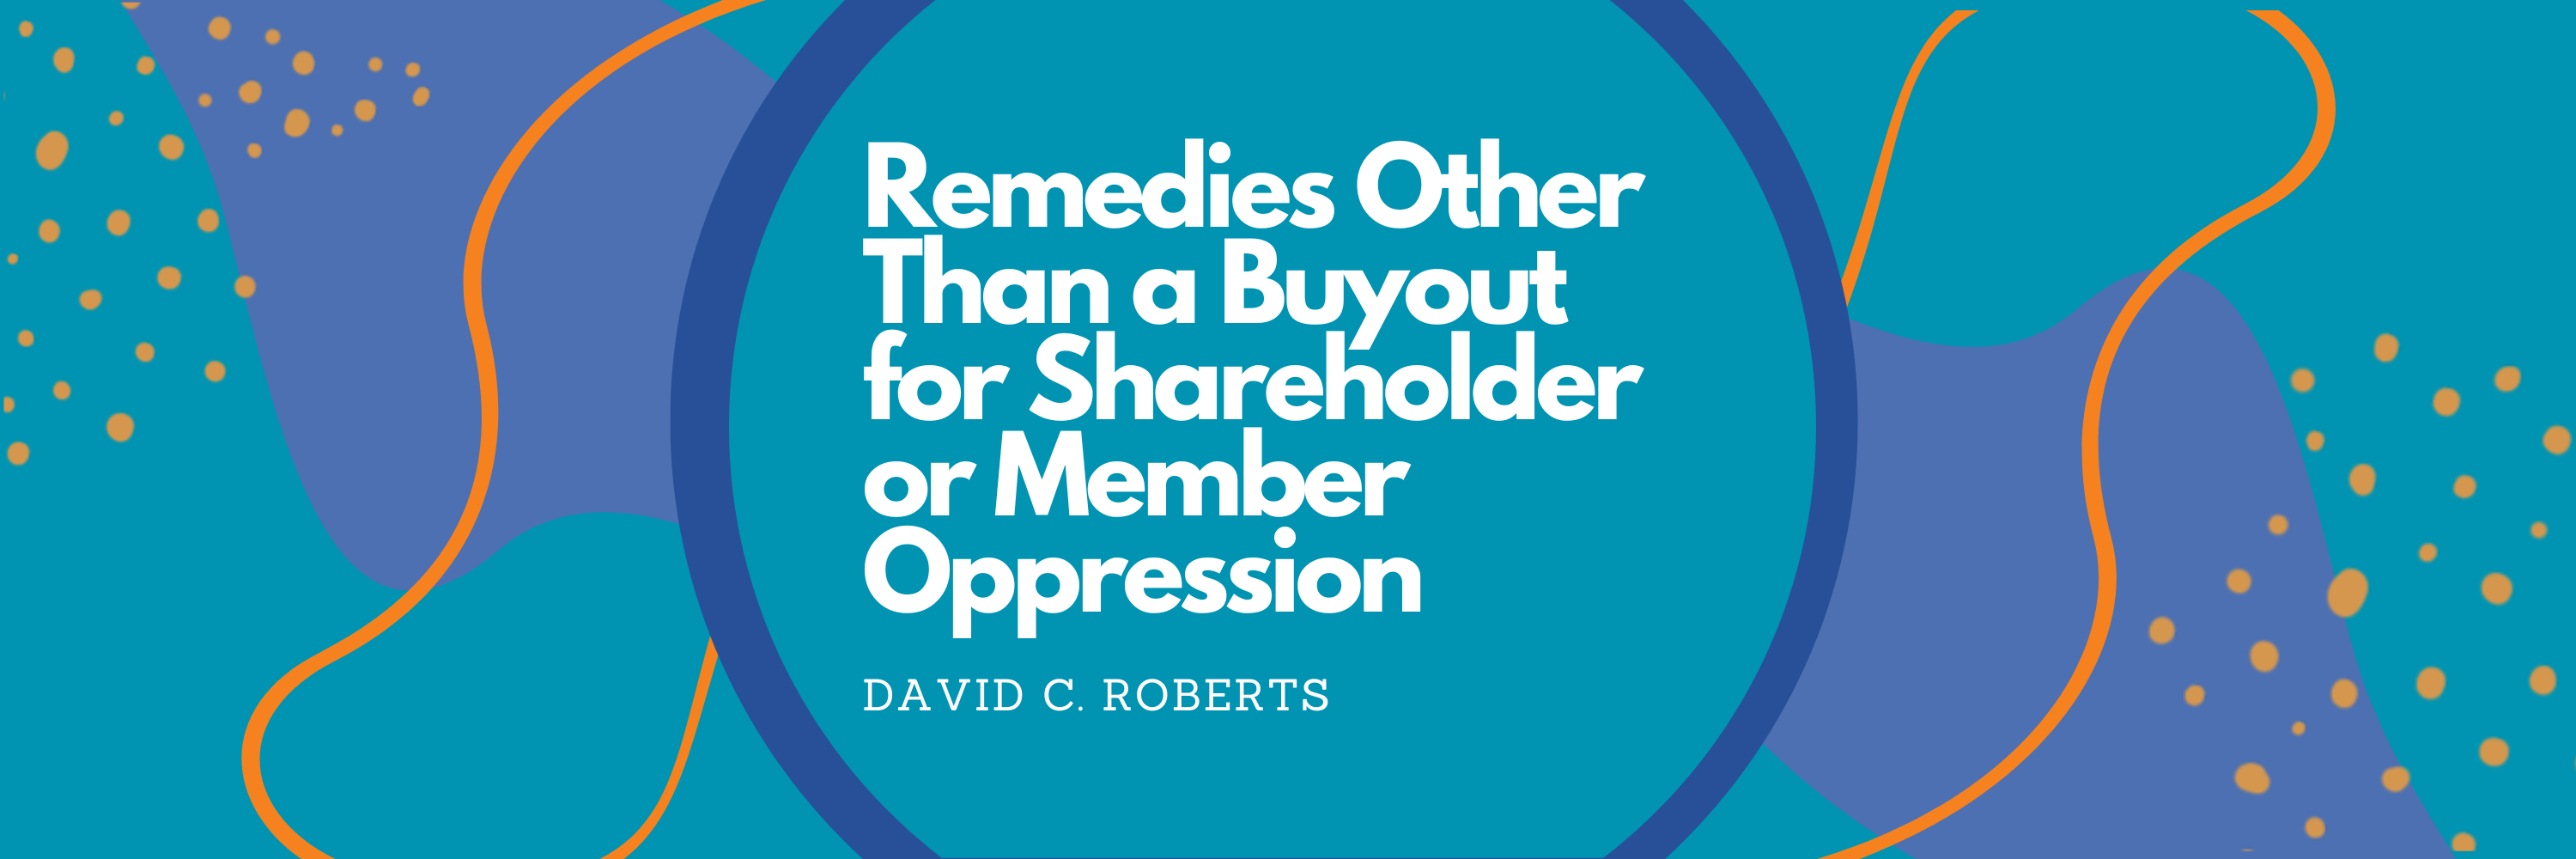 Remedies Other Than a Buyout for Shareholder or Member Oppression